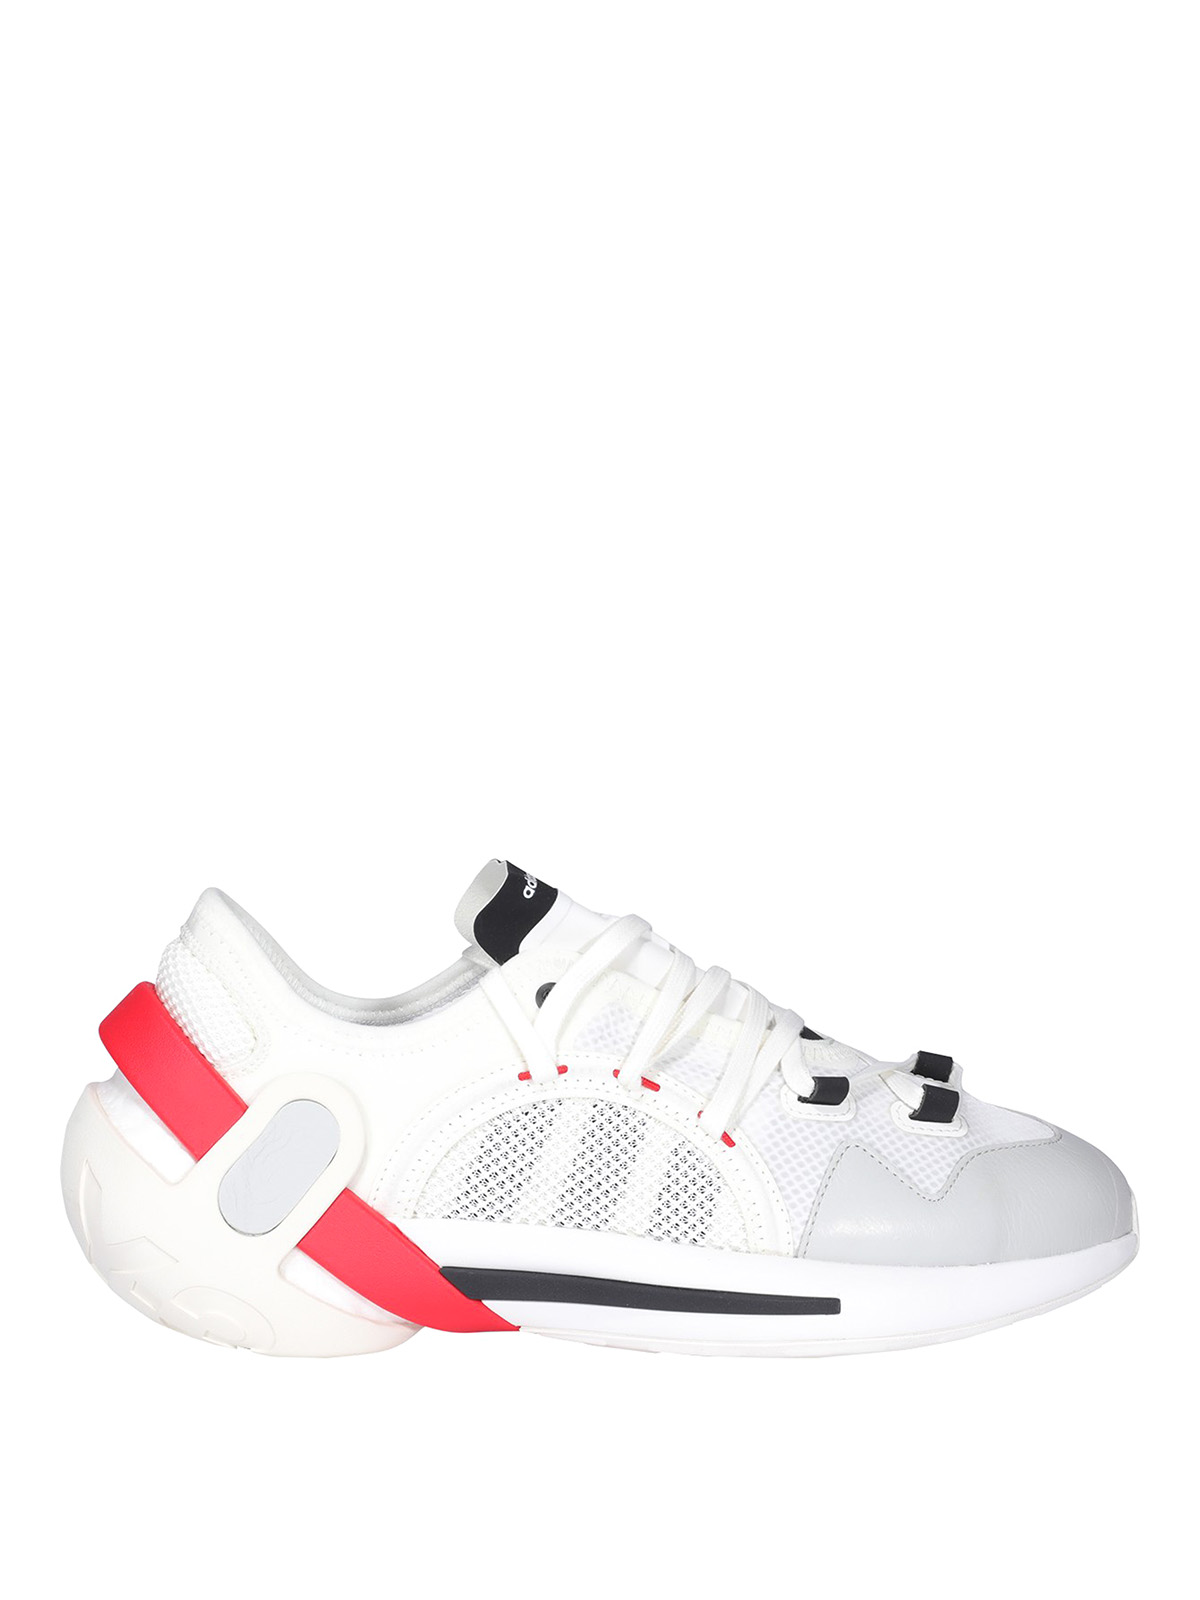 Y-3 IDOSO BOOST SNEAKERS